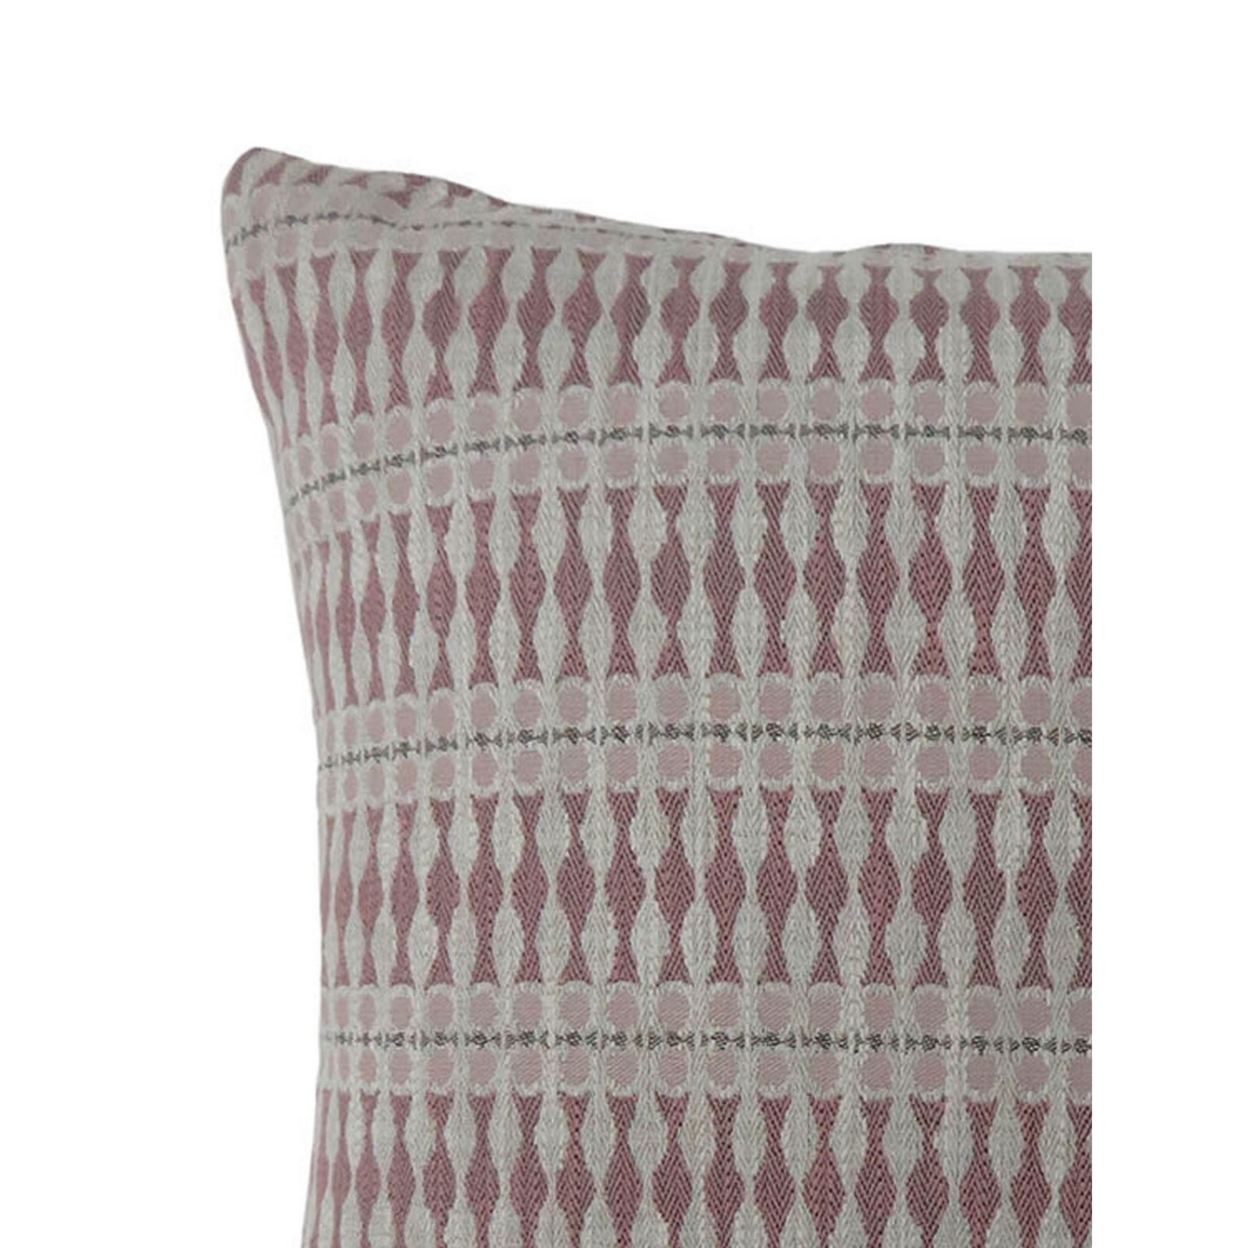 18 Inch Throw Pillow, Set Of 2, Tribal Design Pattern Polyester Fabric, Gray, Red